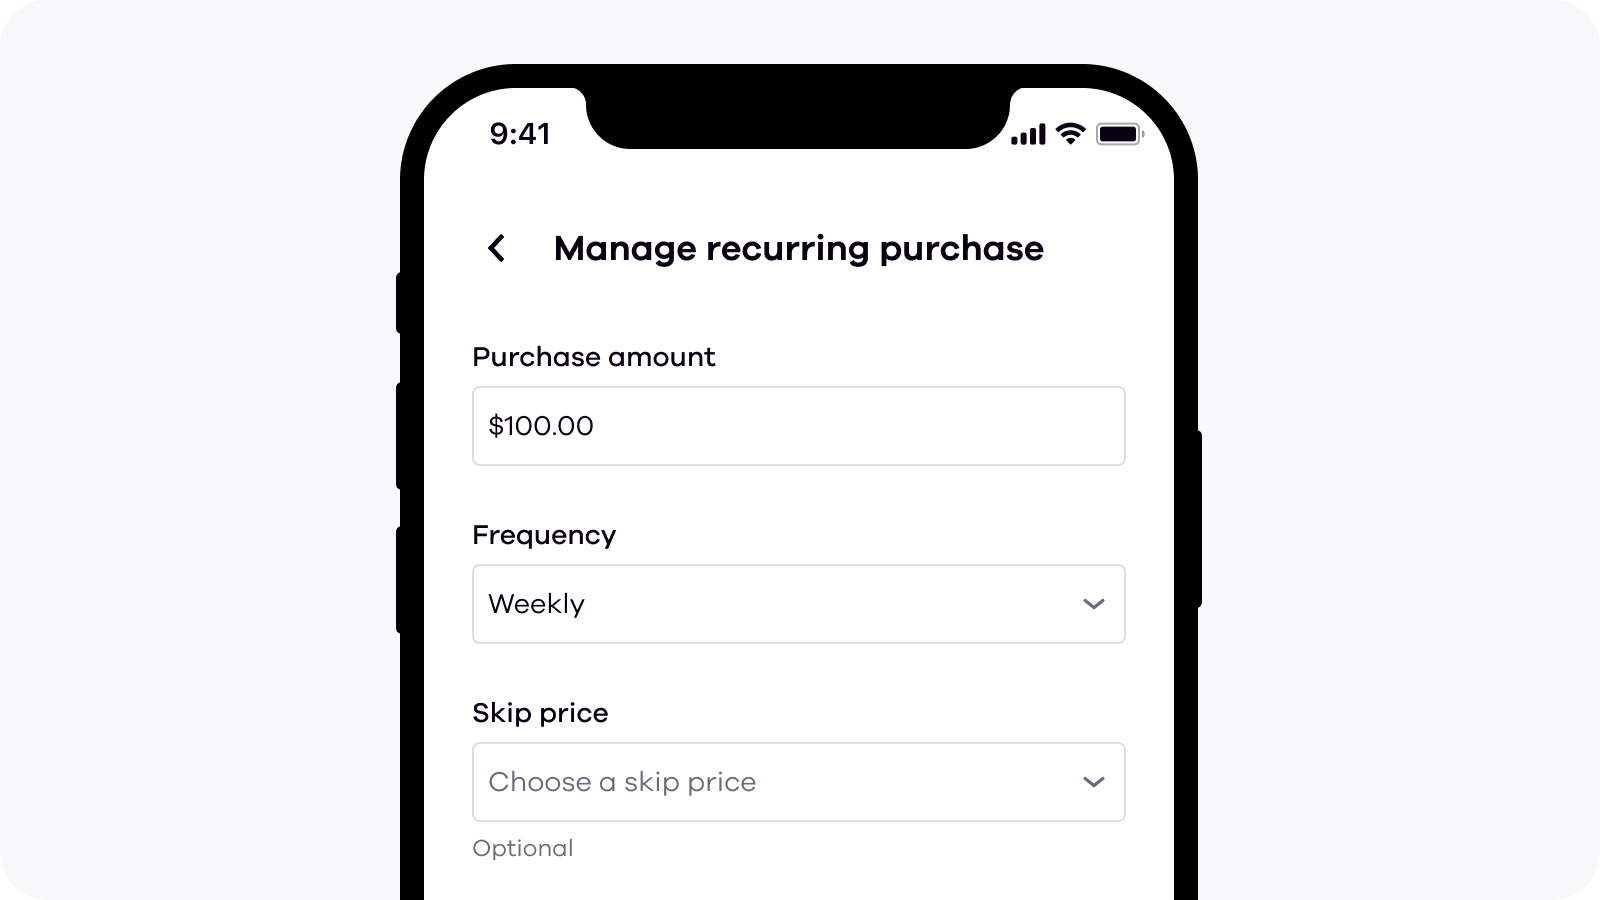 Okcoin app Manage recurring purchase with amount, frequency, skip price, and payment method